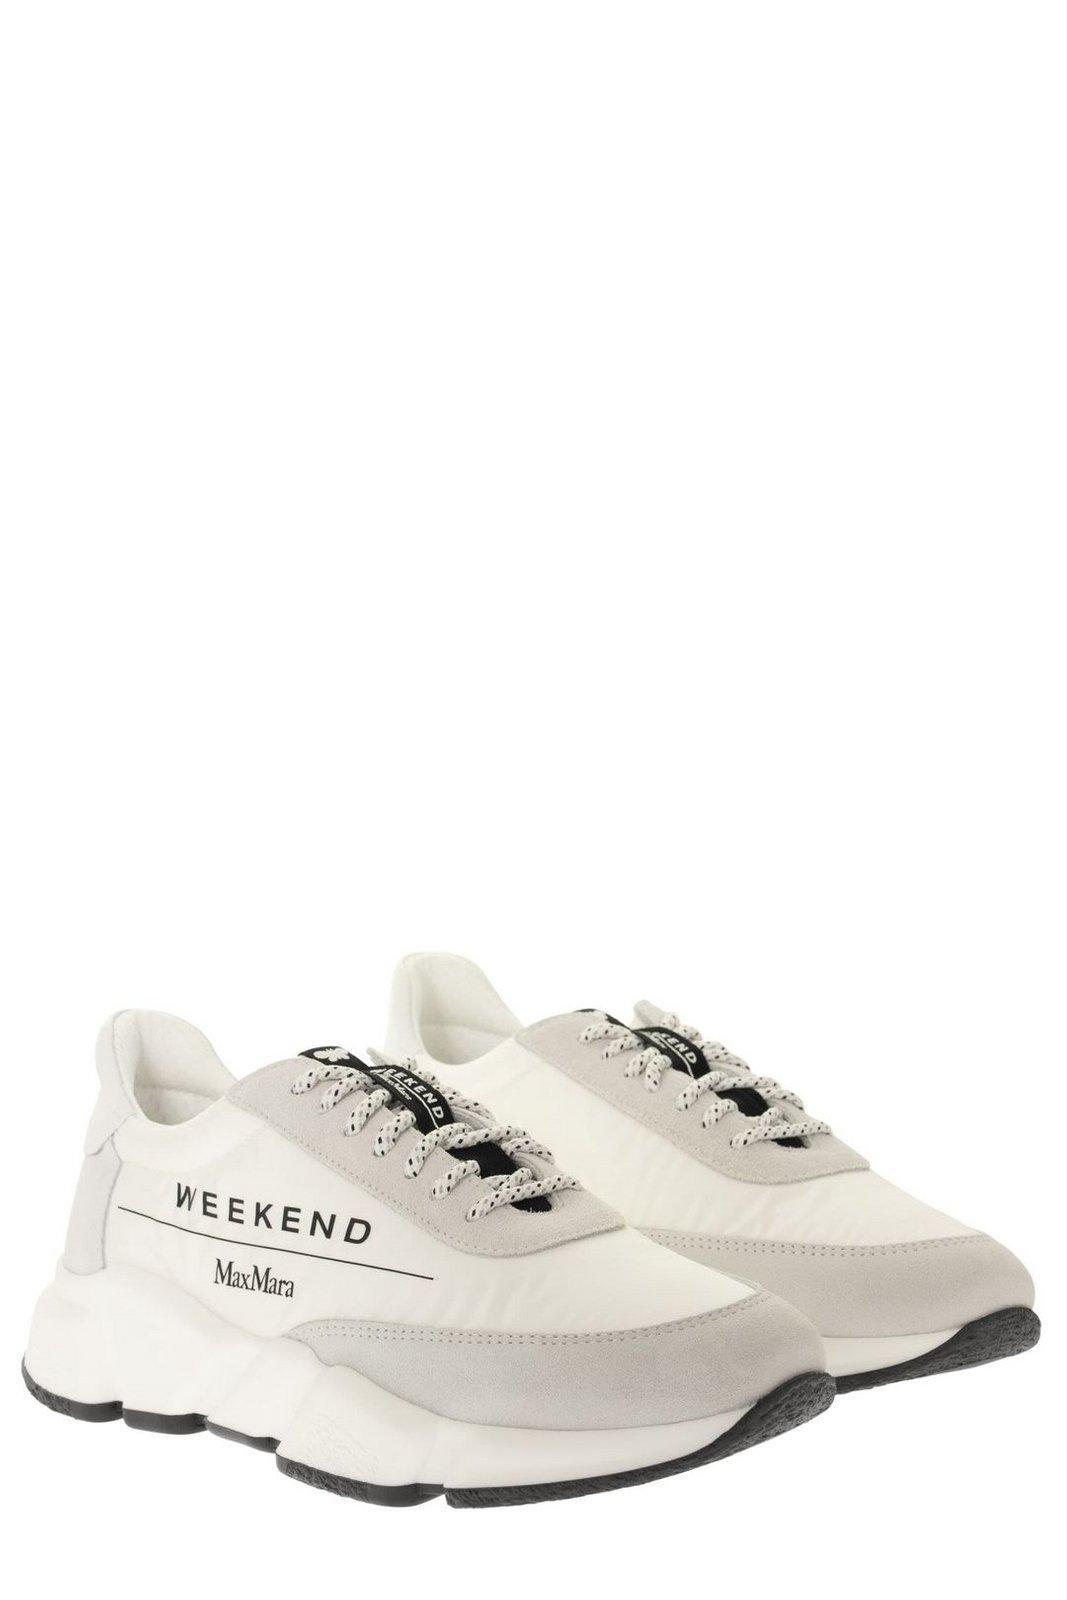 Weekend by Maxmara Logo Printed Trainers in White | Lyst